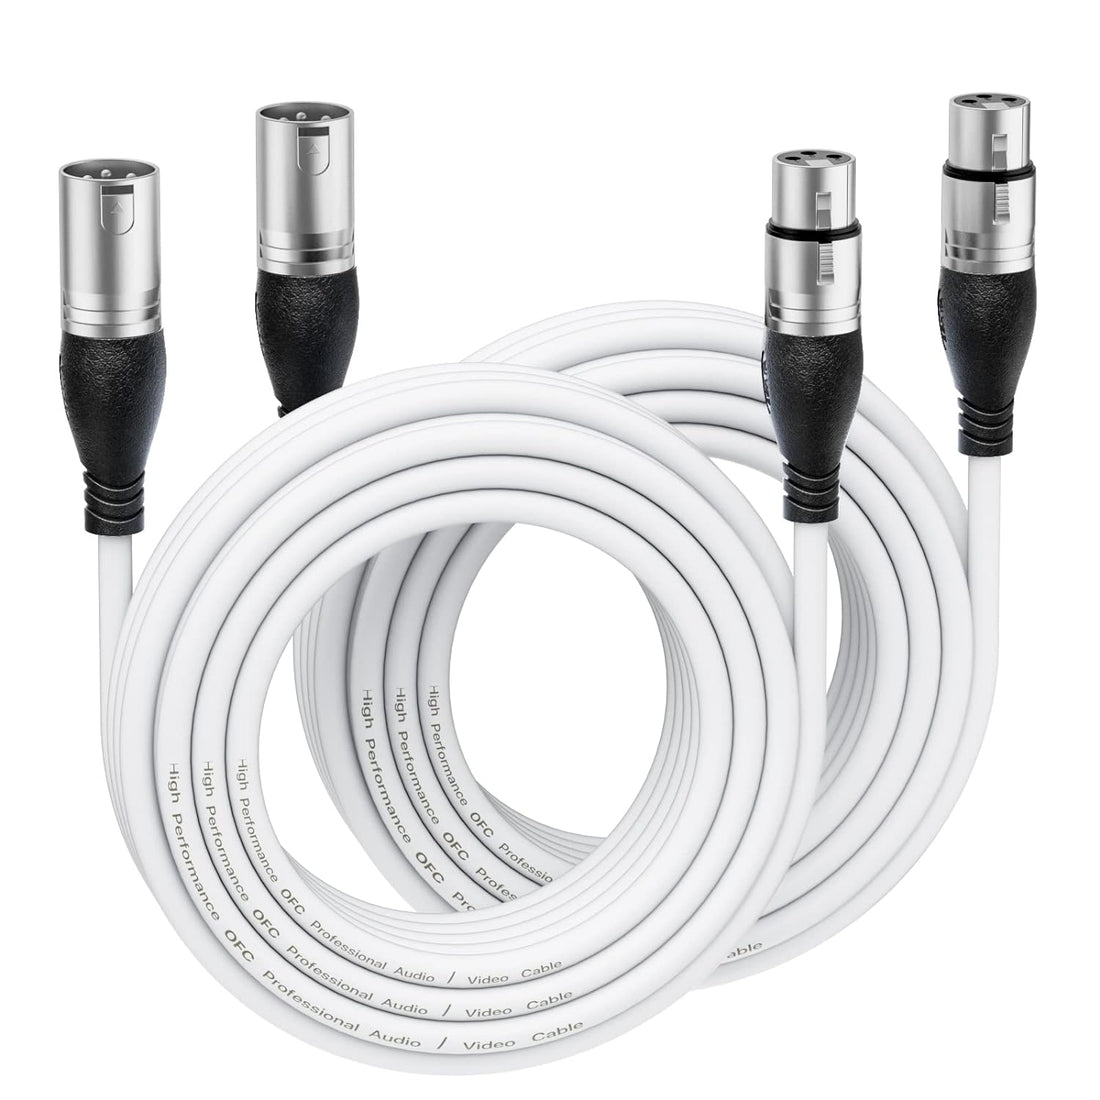 EBXYA XLR Cable 20 Ft 2 Packs - Premium Microphone Cable Patch Speaker Cable 3-Pin XLR Male to Female, White